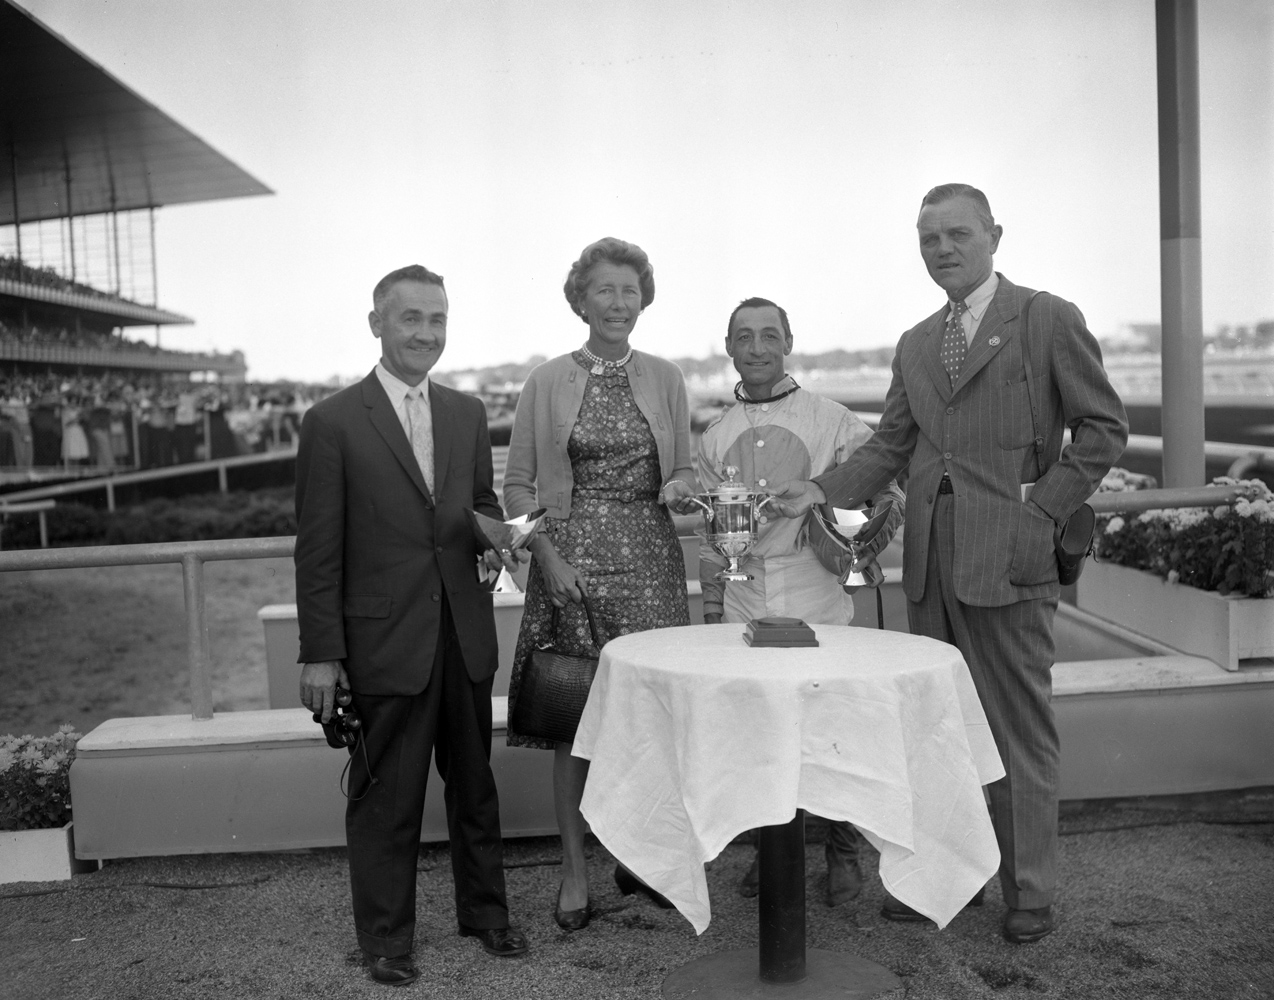 Carl Hanford, Allaire du Ppont, Eddie Arcaro, R. Strawbridge, Jr. at the trophy presentation for Kelso's 1960 Jerome Handicap win at Aqueduct (Keeneland Library Morgan Collection)